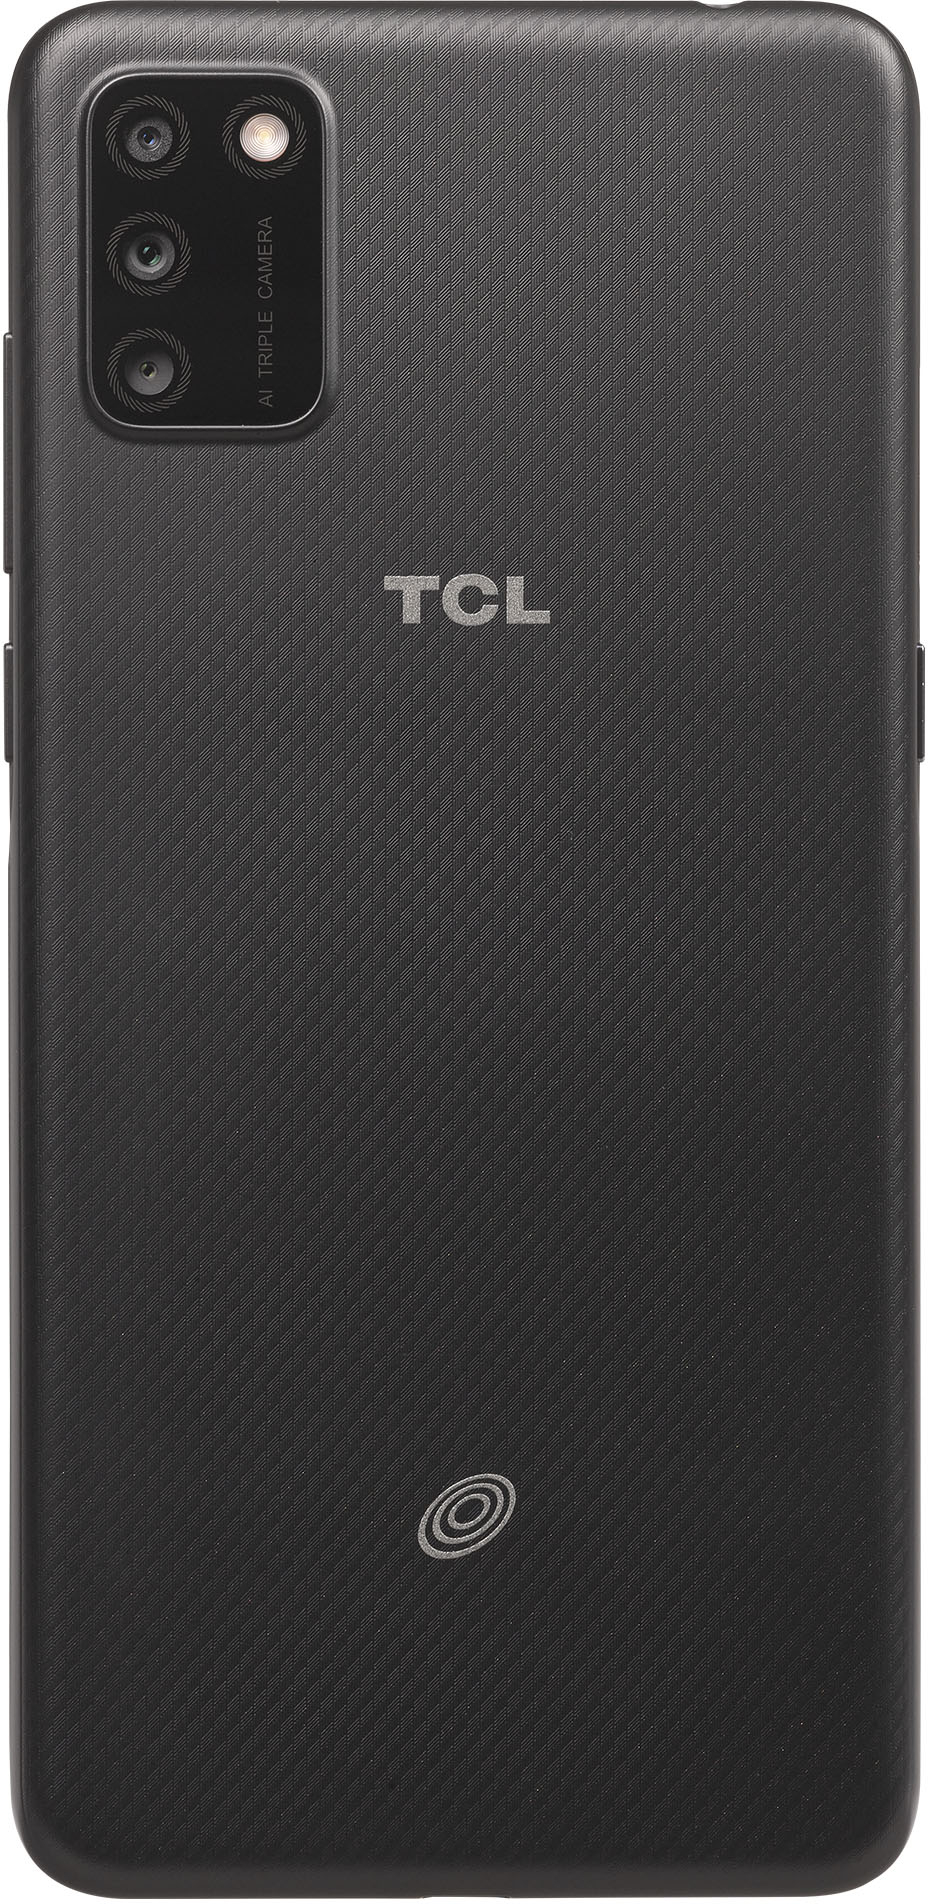 Back View: Tracfone - TCL A3X 32GB Prepaid